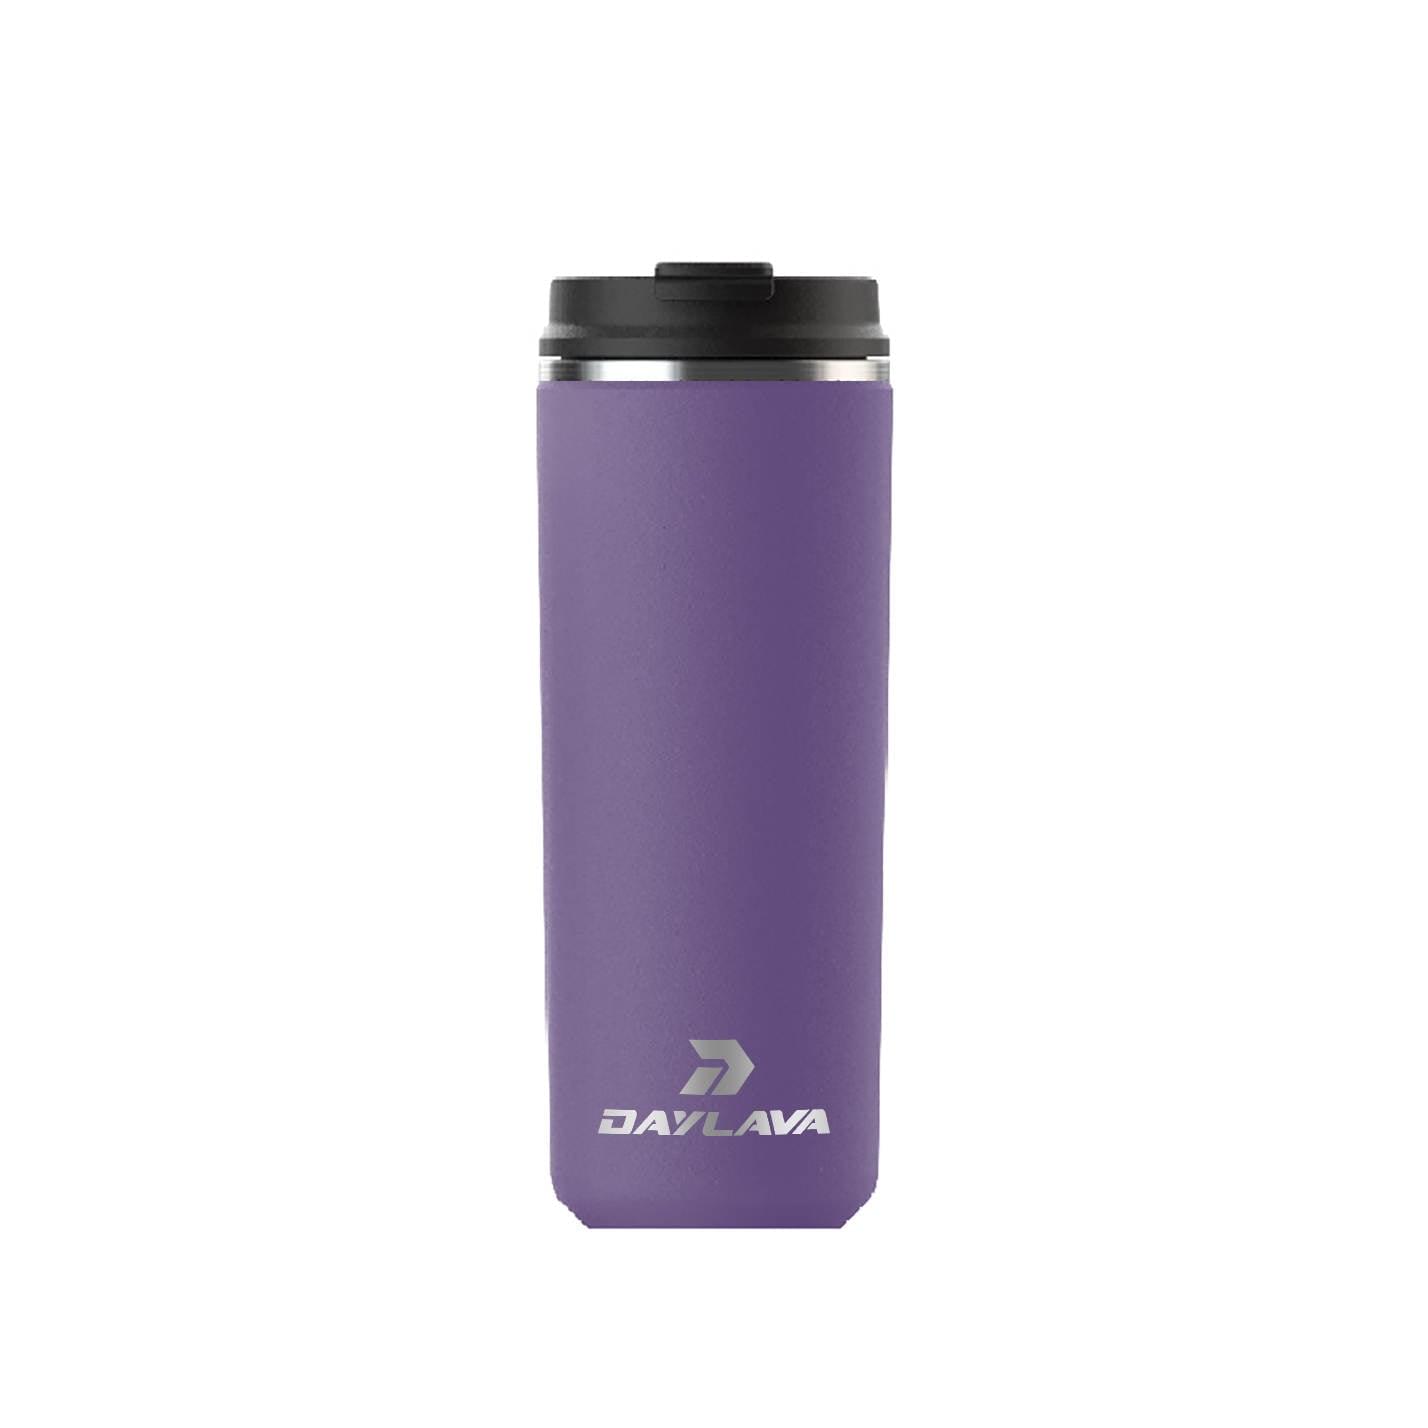 16oz Coffee Tumbler- Purple - DayLava - Hydration on the GO! - The Perfect Drinkware Solution.